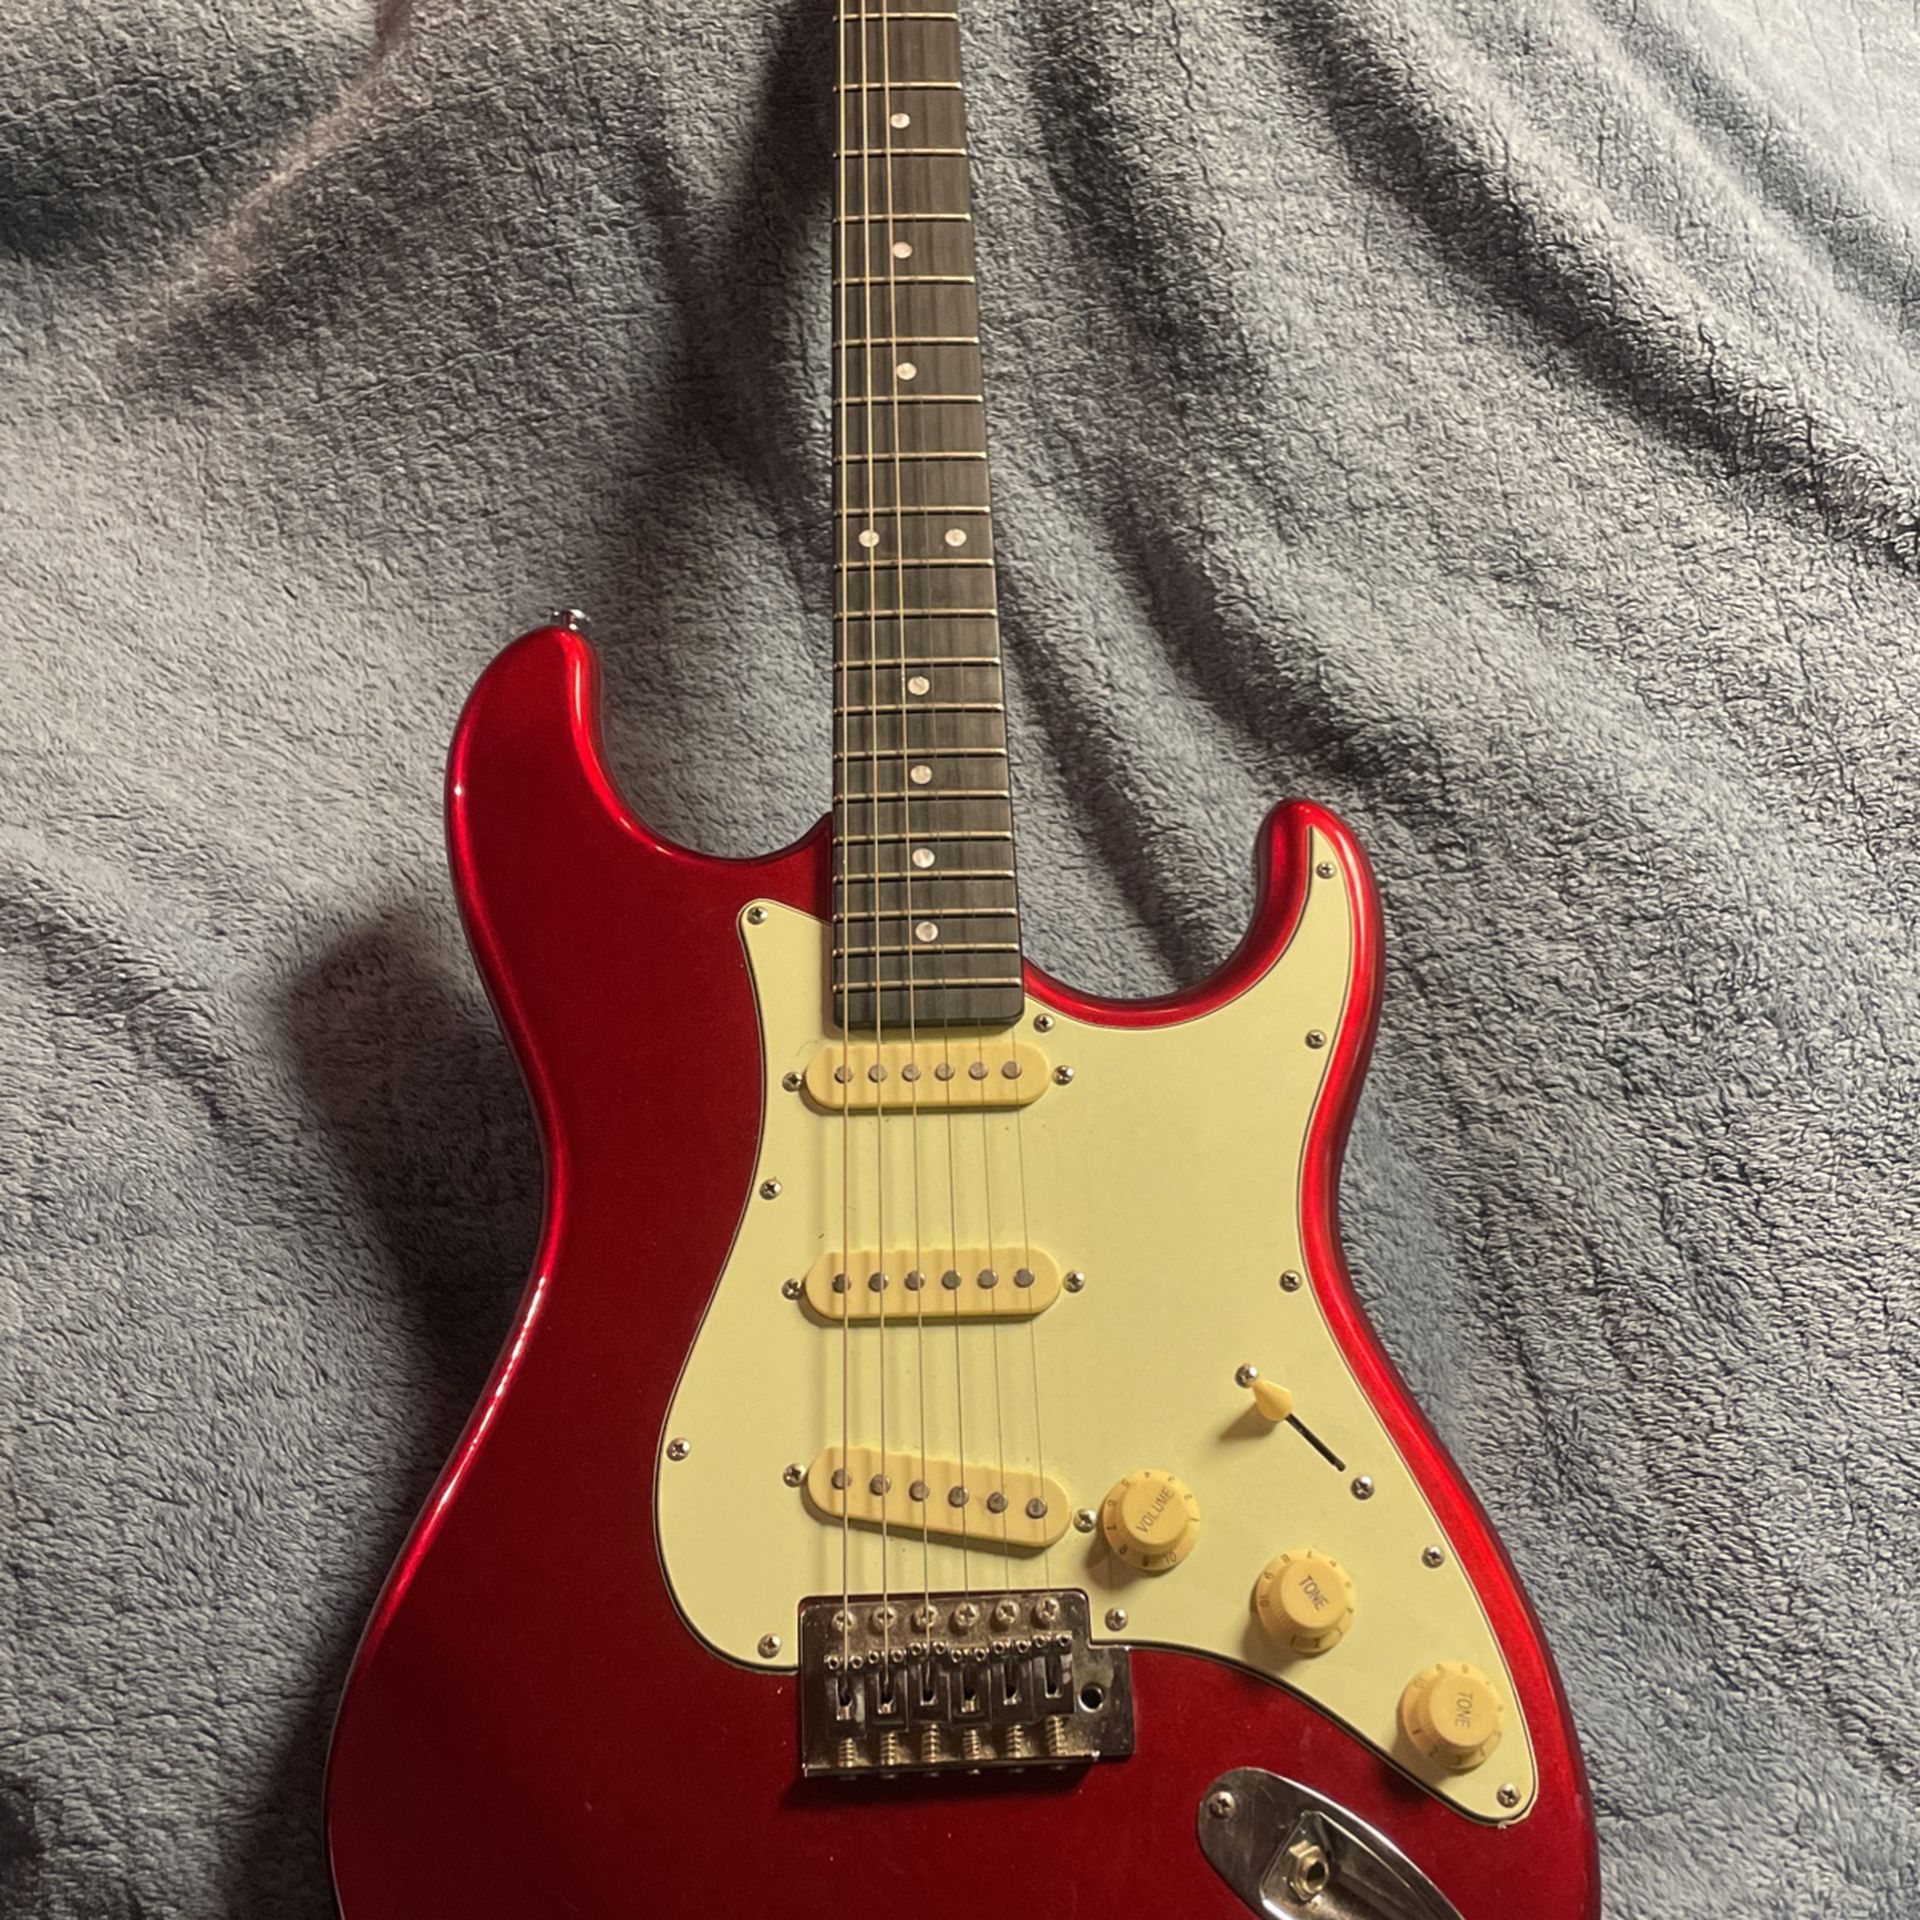  Tagima Strat, Red and Beige 